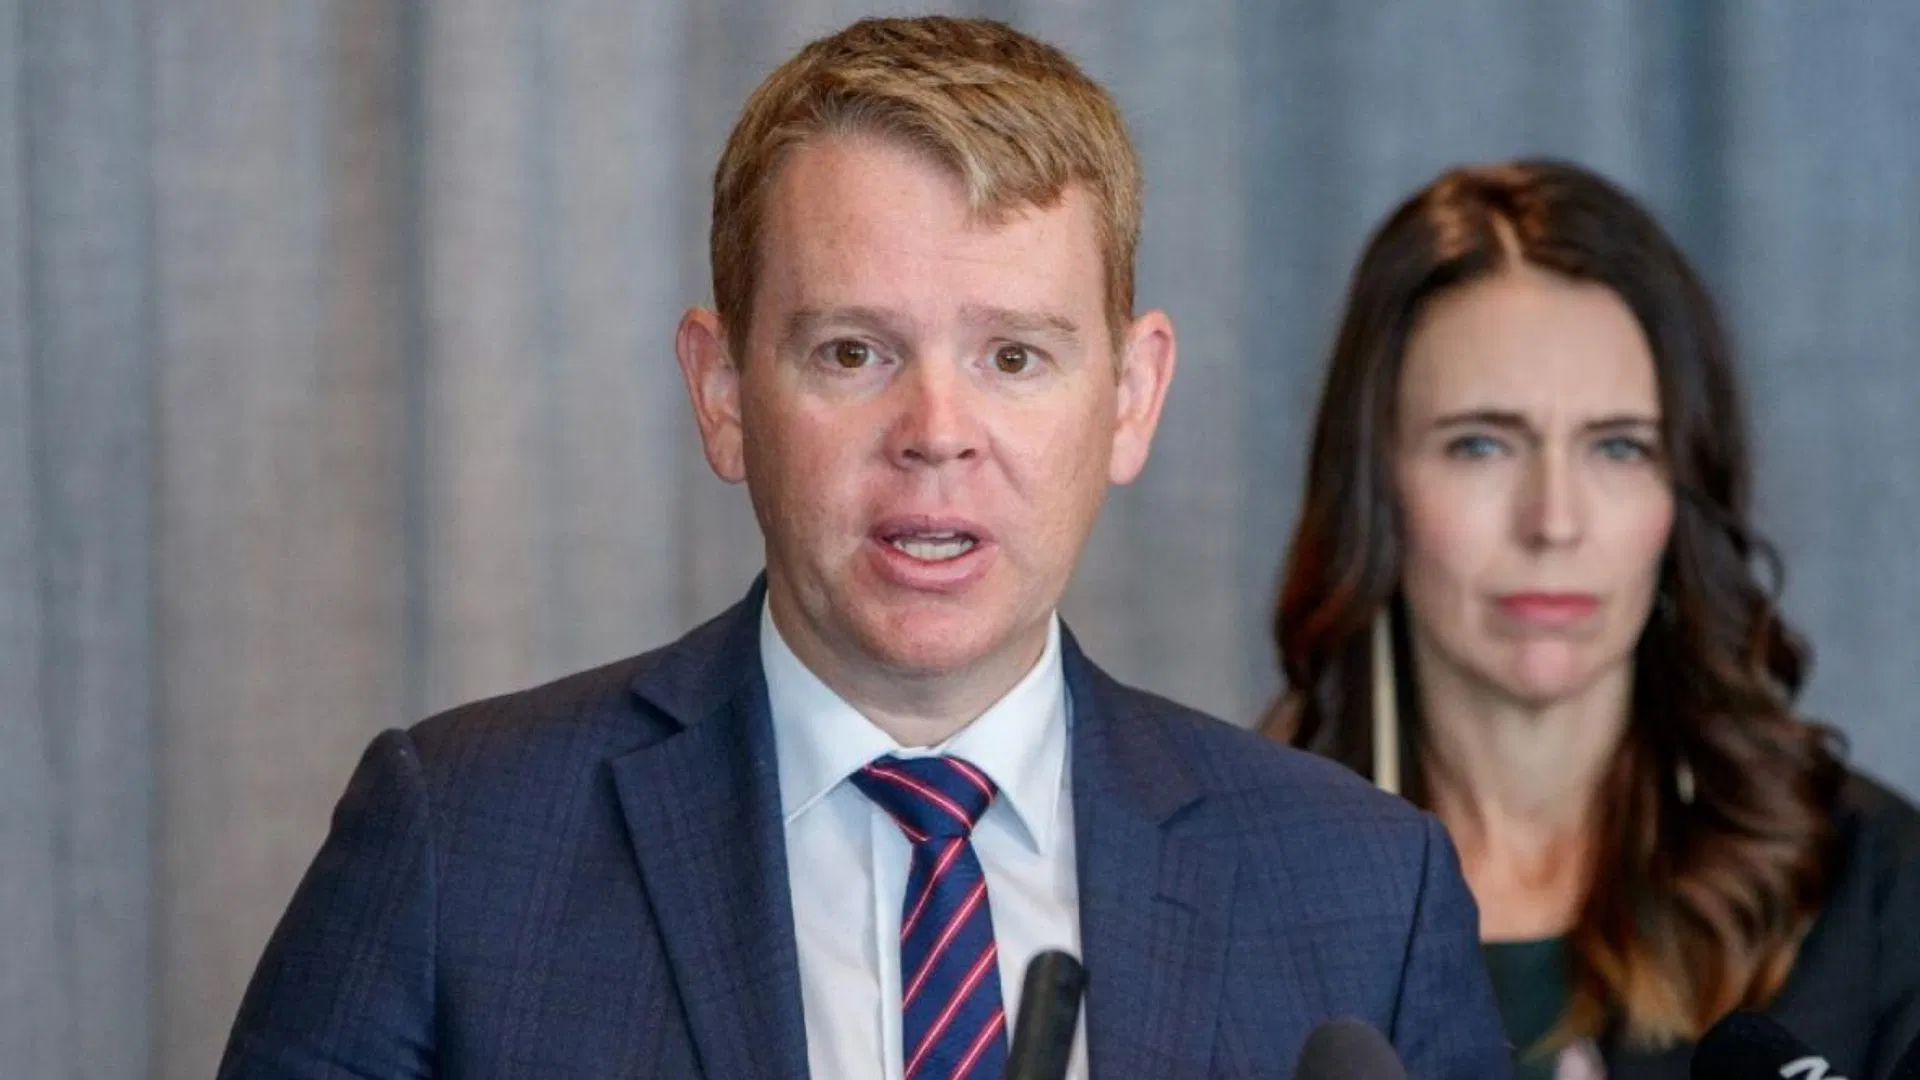 Chris Hipkins will become the new PM of New Zealand, replacing Jacinda Ardern